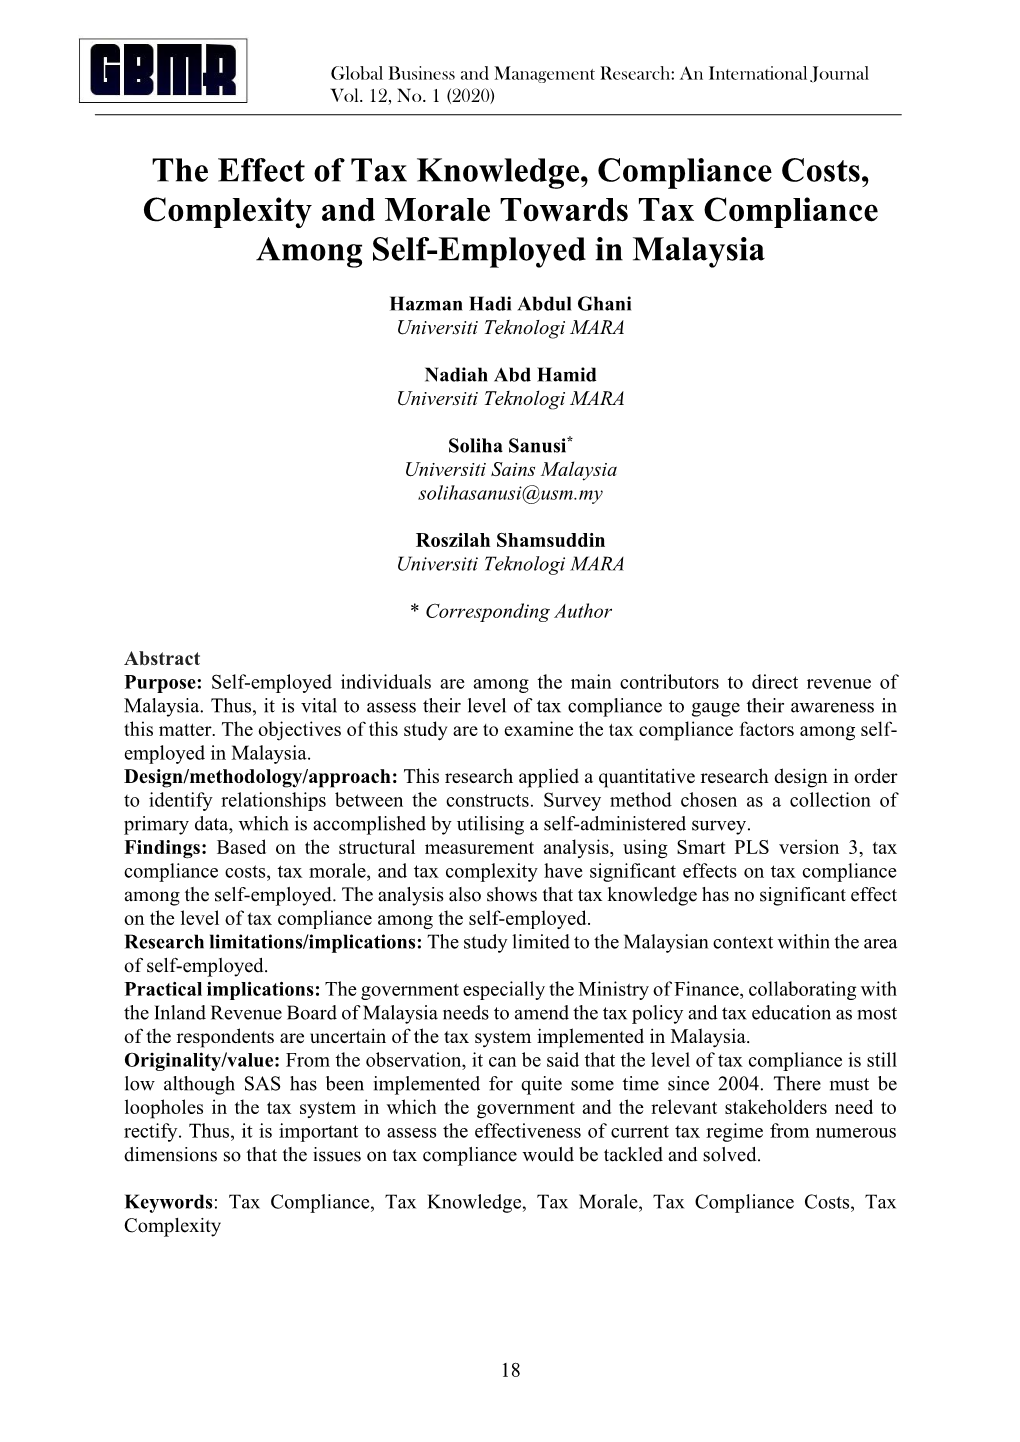 The Effect of Tax Knowledge, Compliance Costs, Complexity and Morale Towards Tax Compliance Among Self-Employed in Malaysia